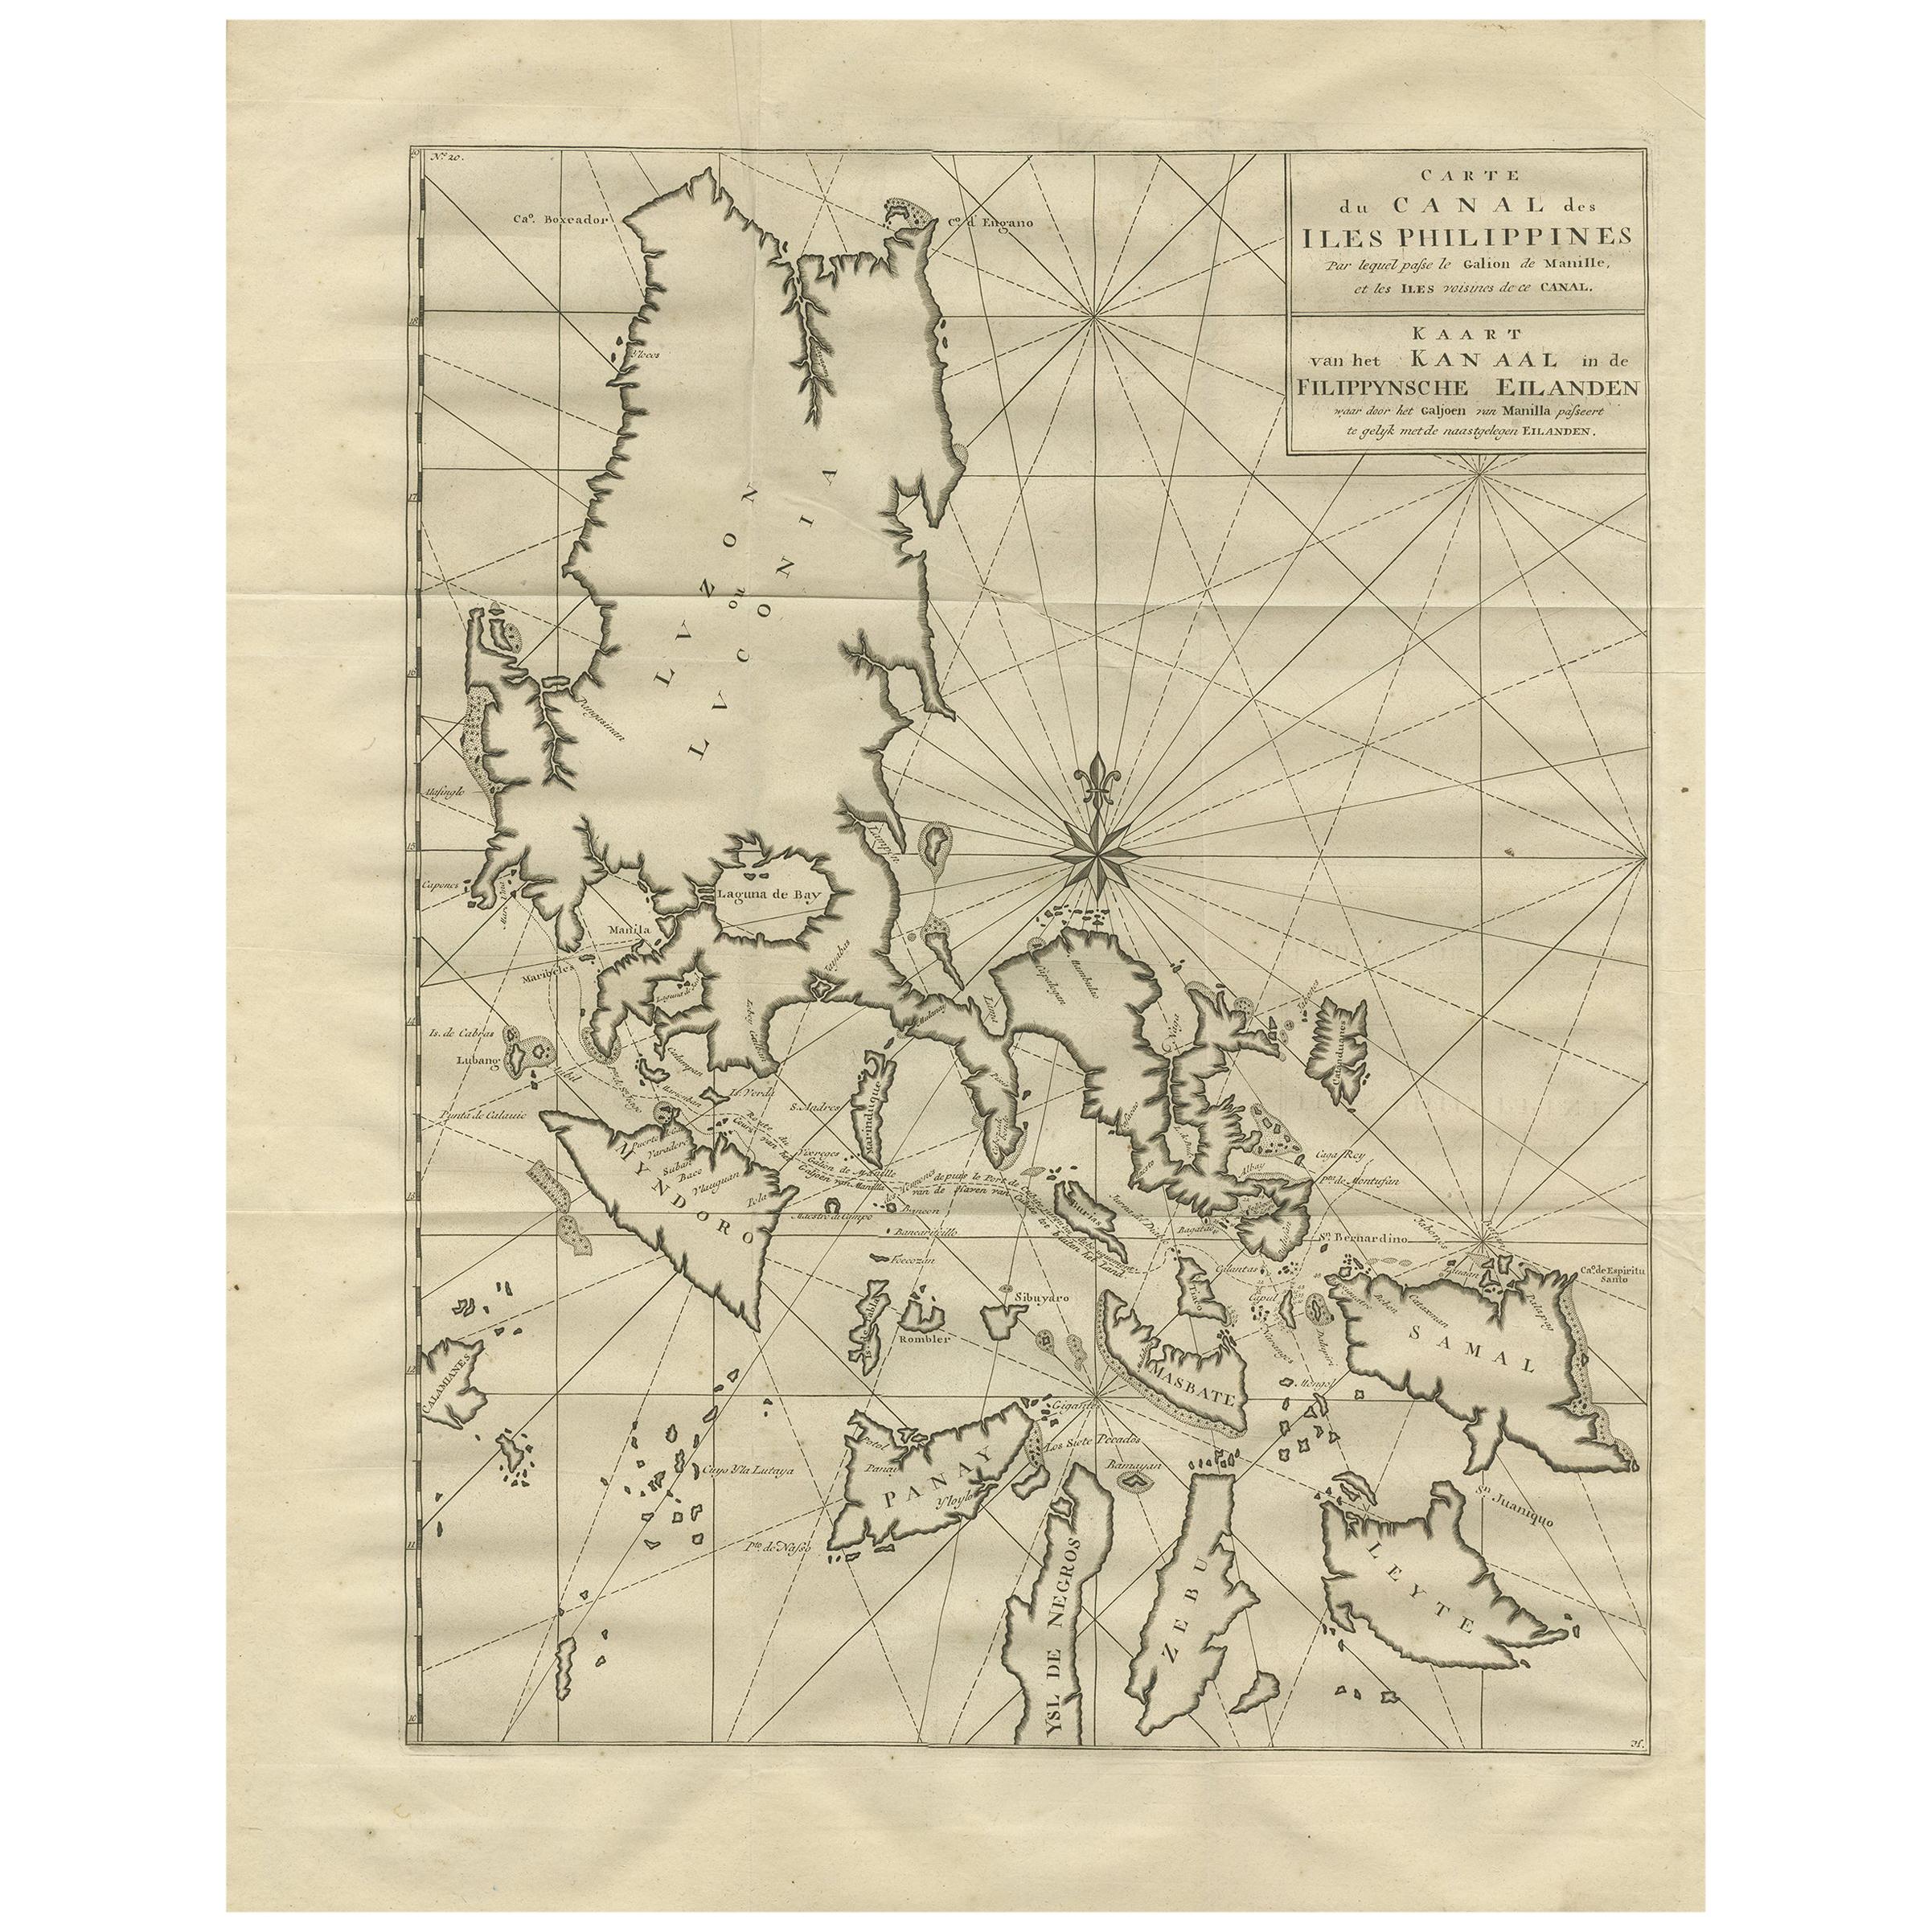 Antique Map of the Philippines by Anson '1749'